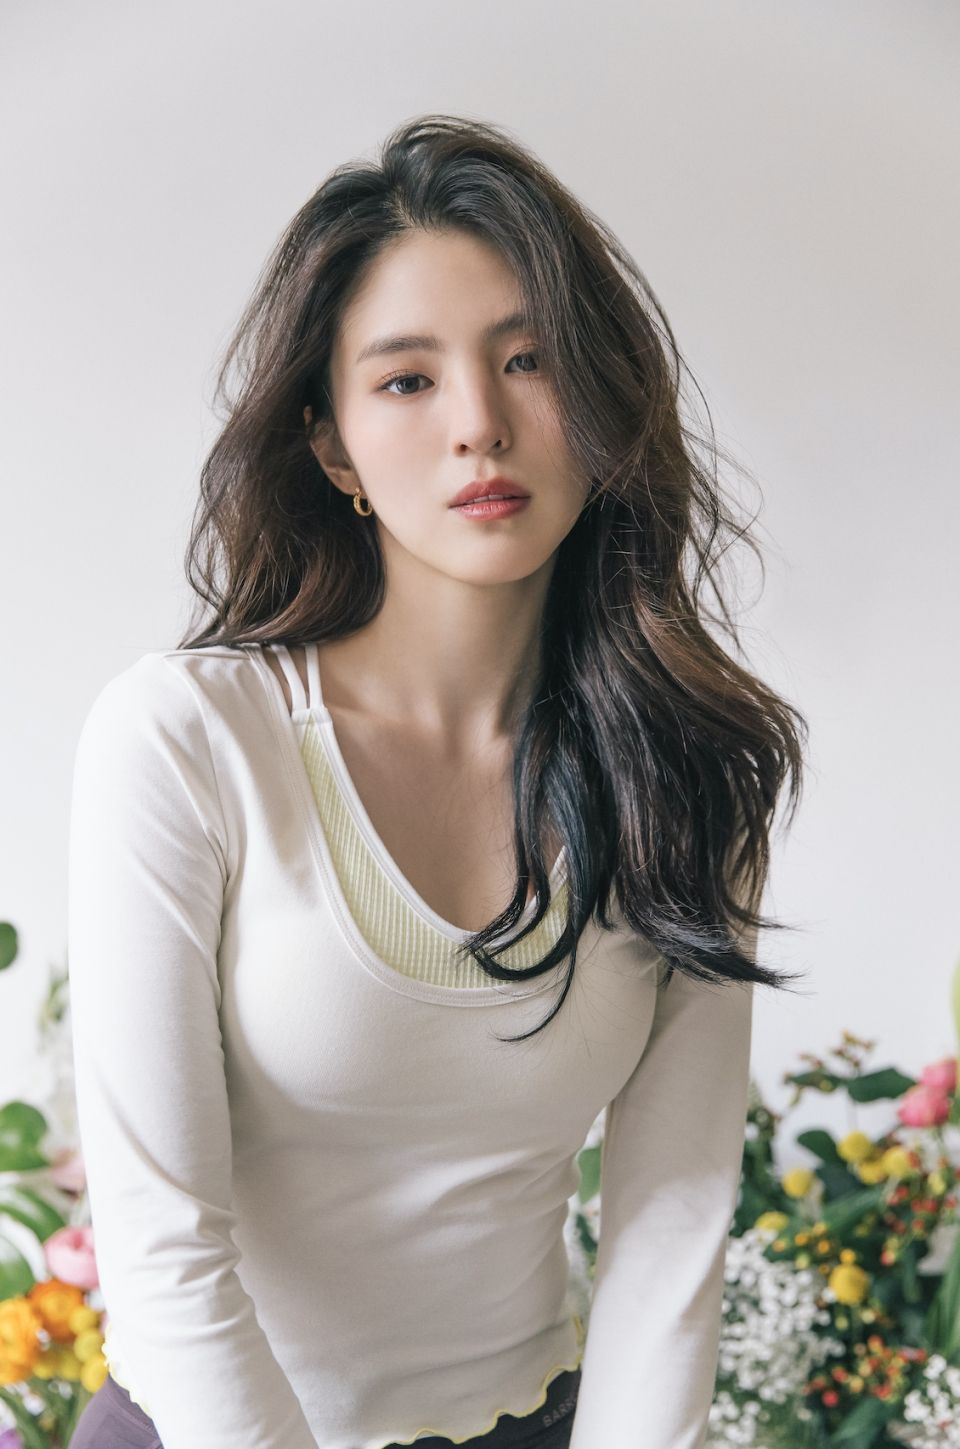 The World of The Married Actress Han So Hee Began Acting For One